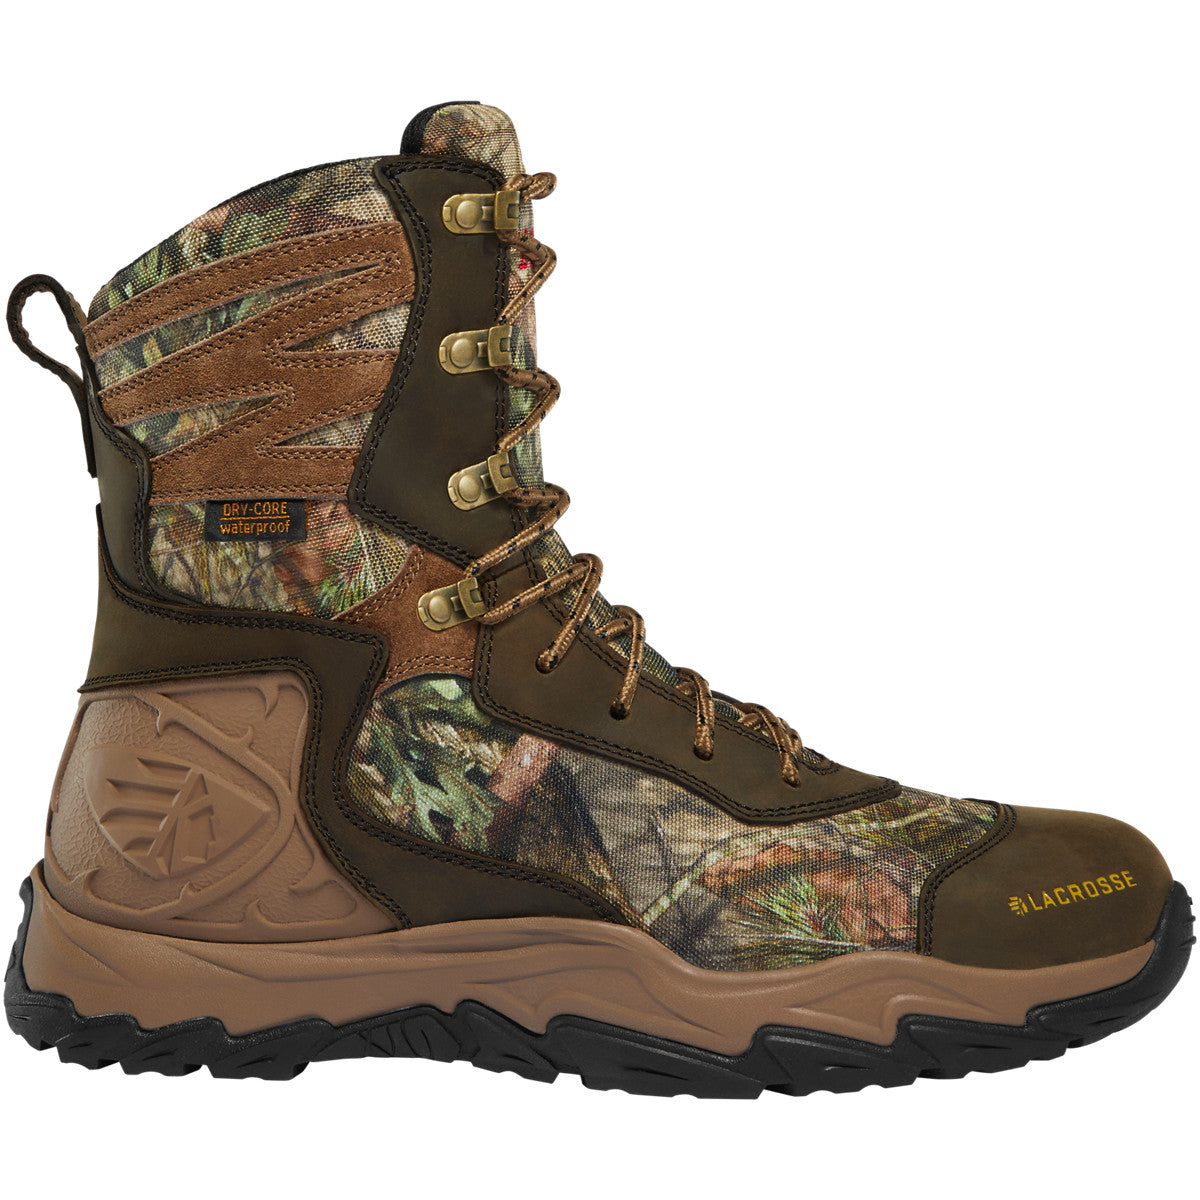 Lacrosse Men's Windrose 8" WP 1000g Thinsulate Hunt Boot - 513362 7 / Medium / Realtree Edge - Overlook Boots